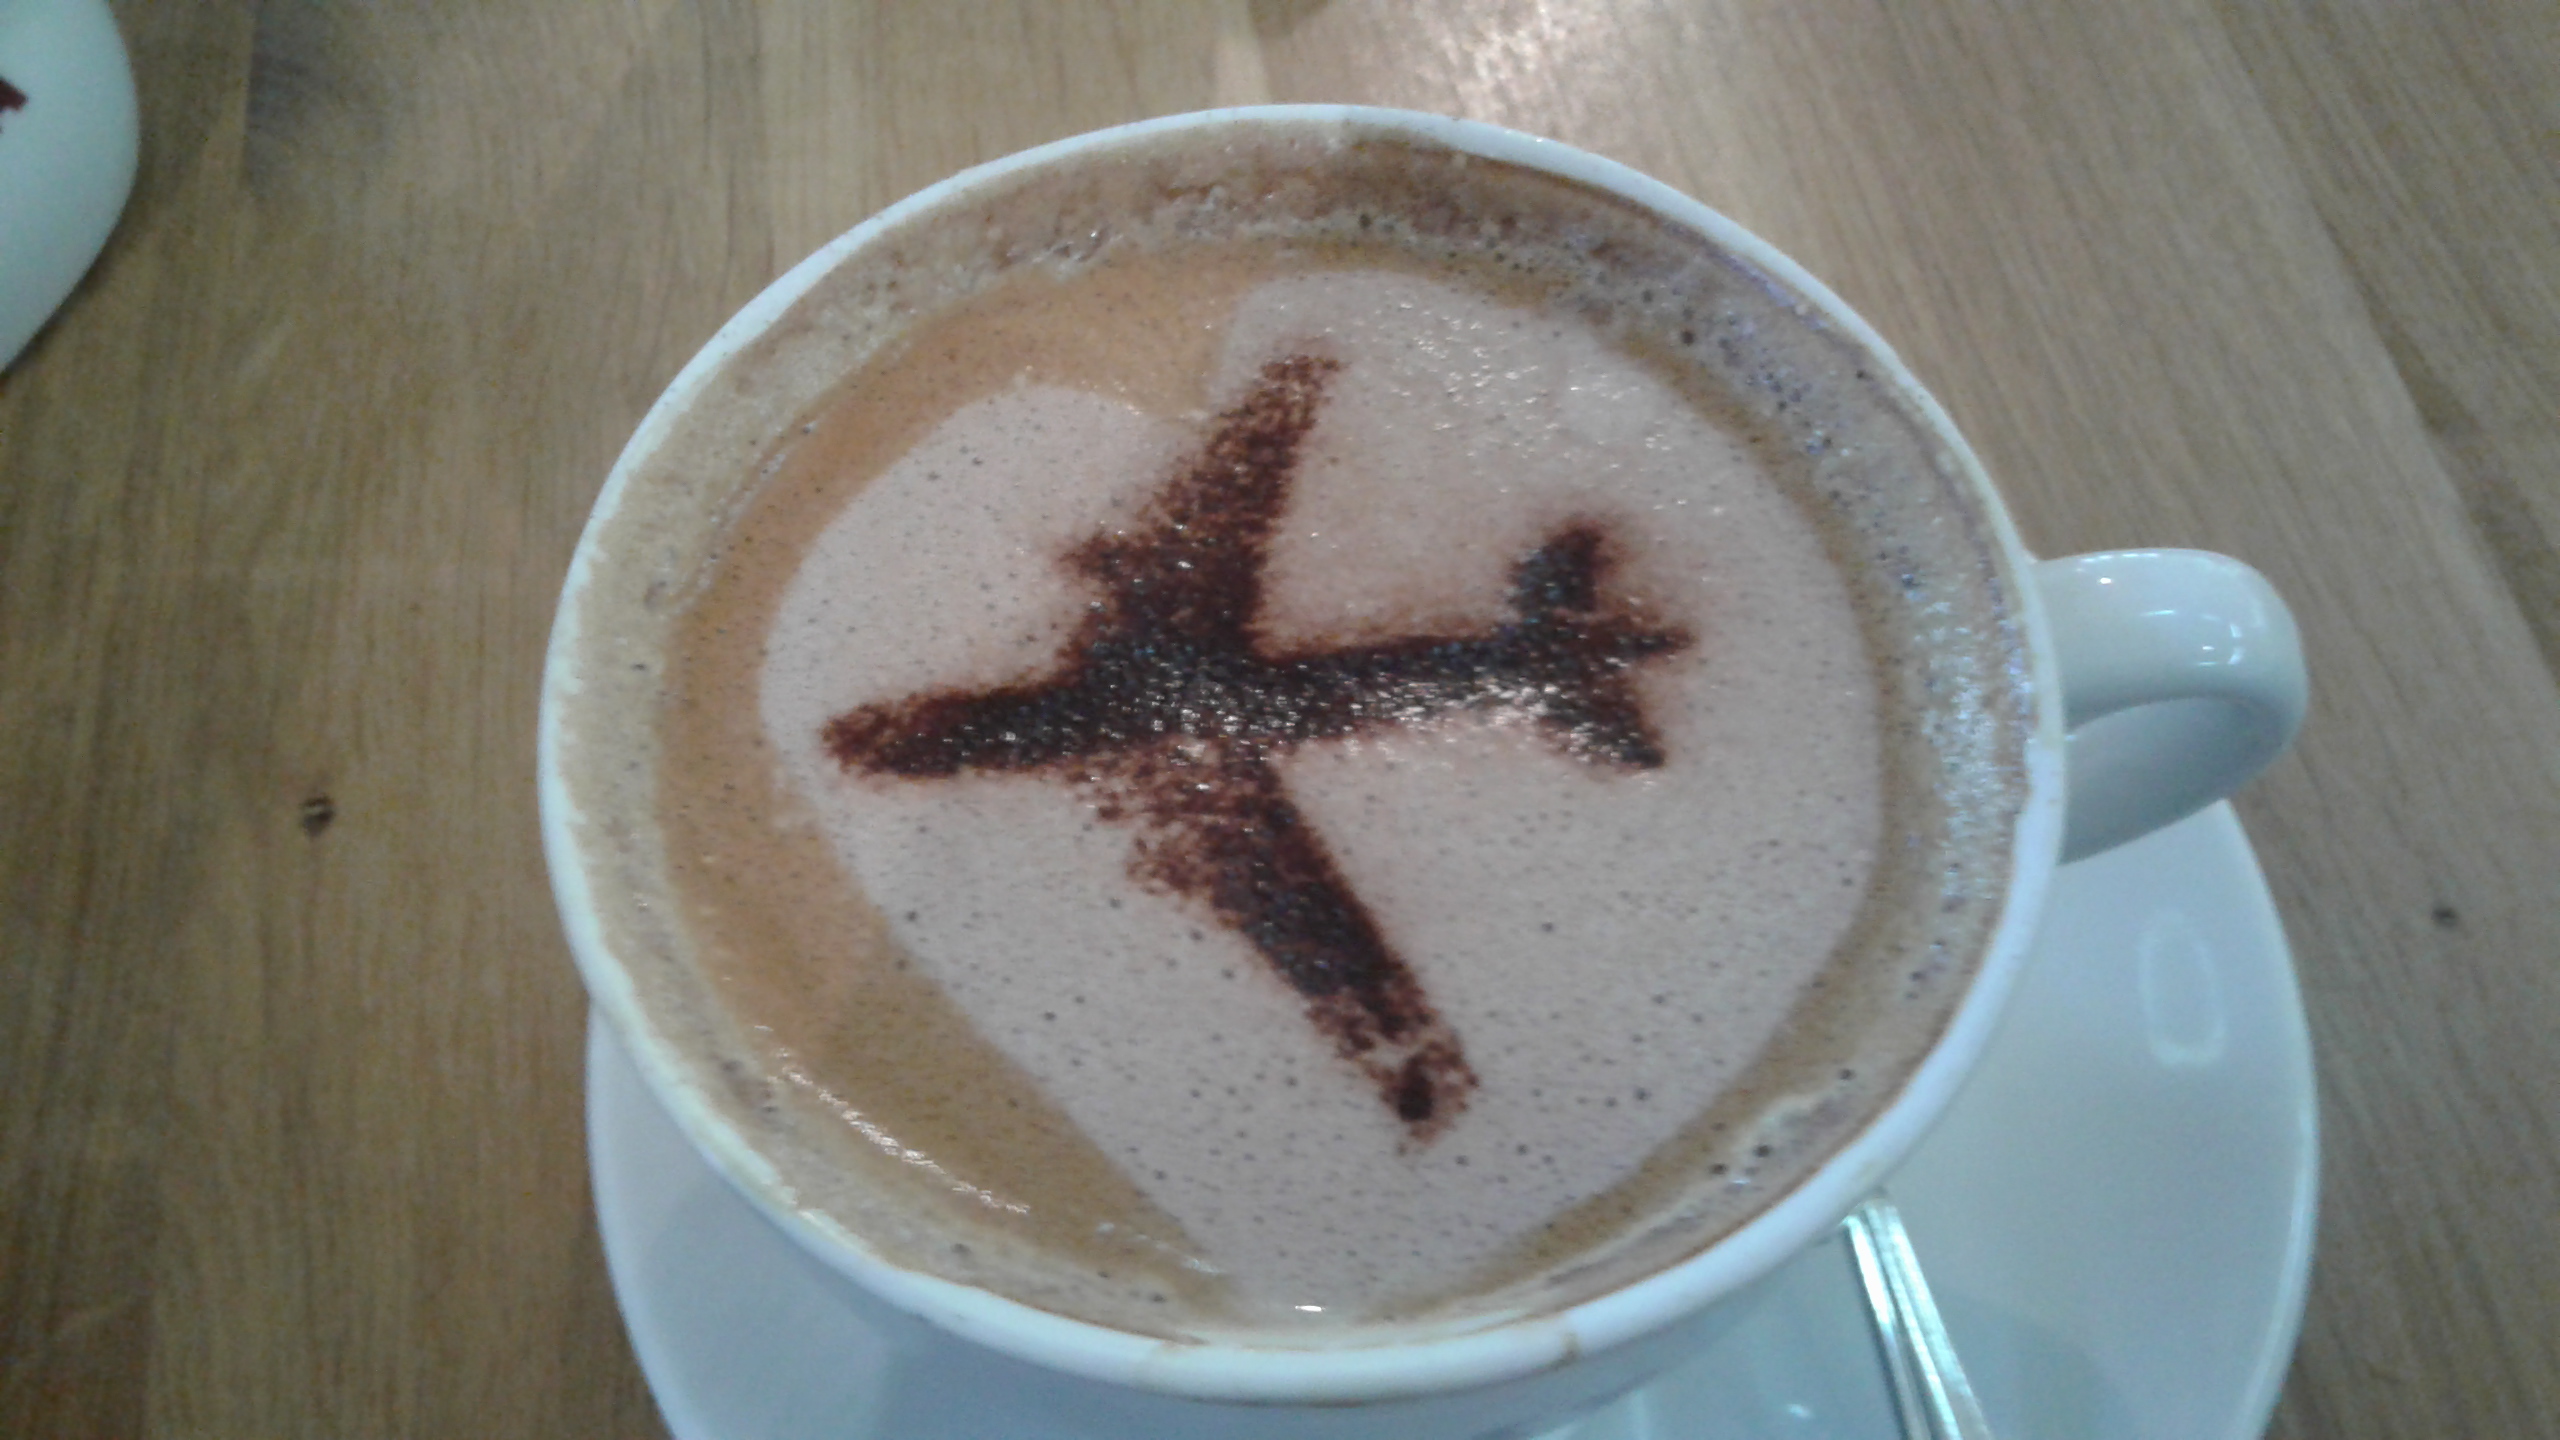 Coffee decorated with cocoa powder in the shape of an airplane